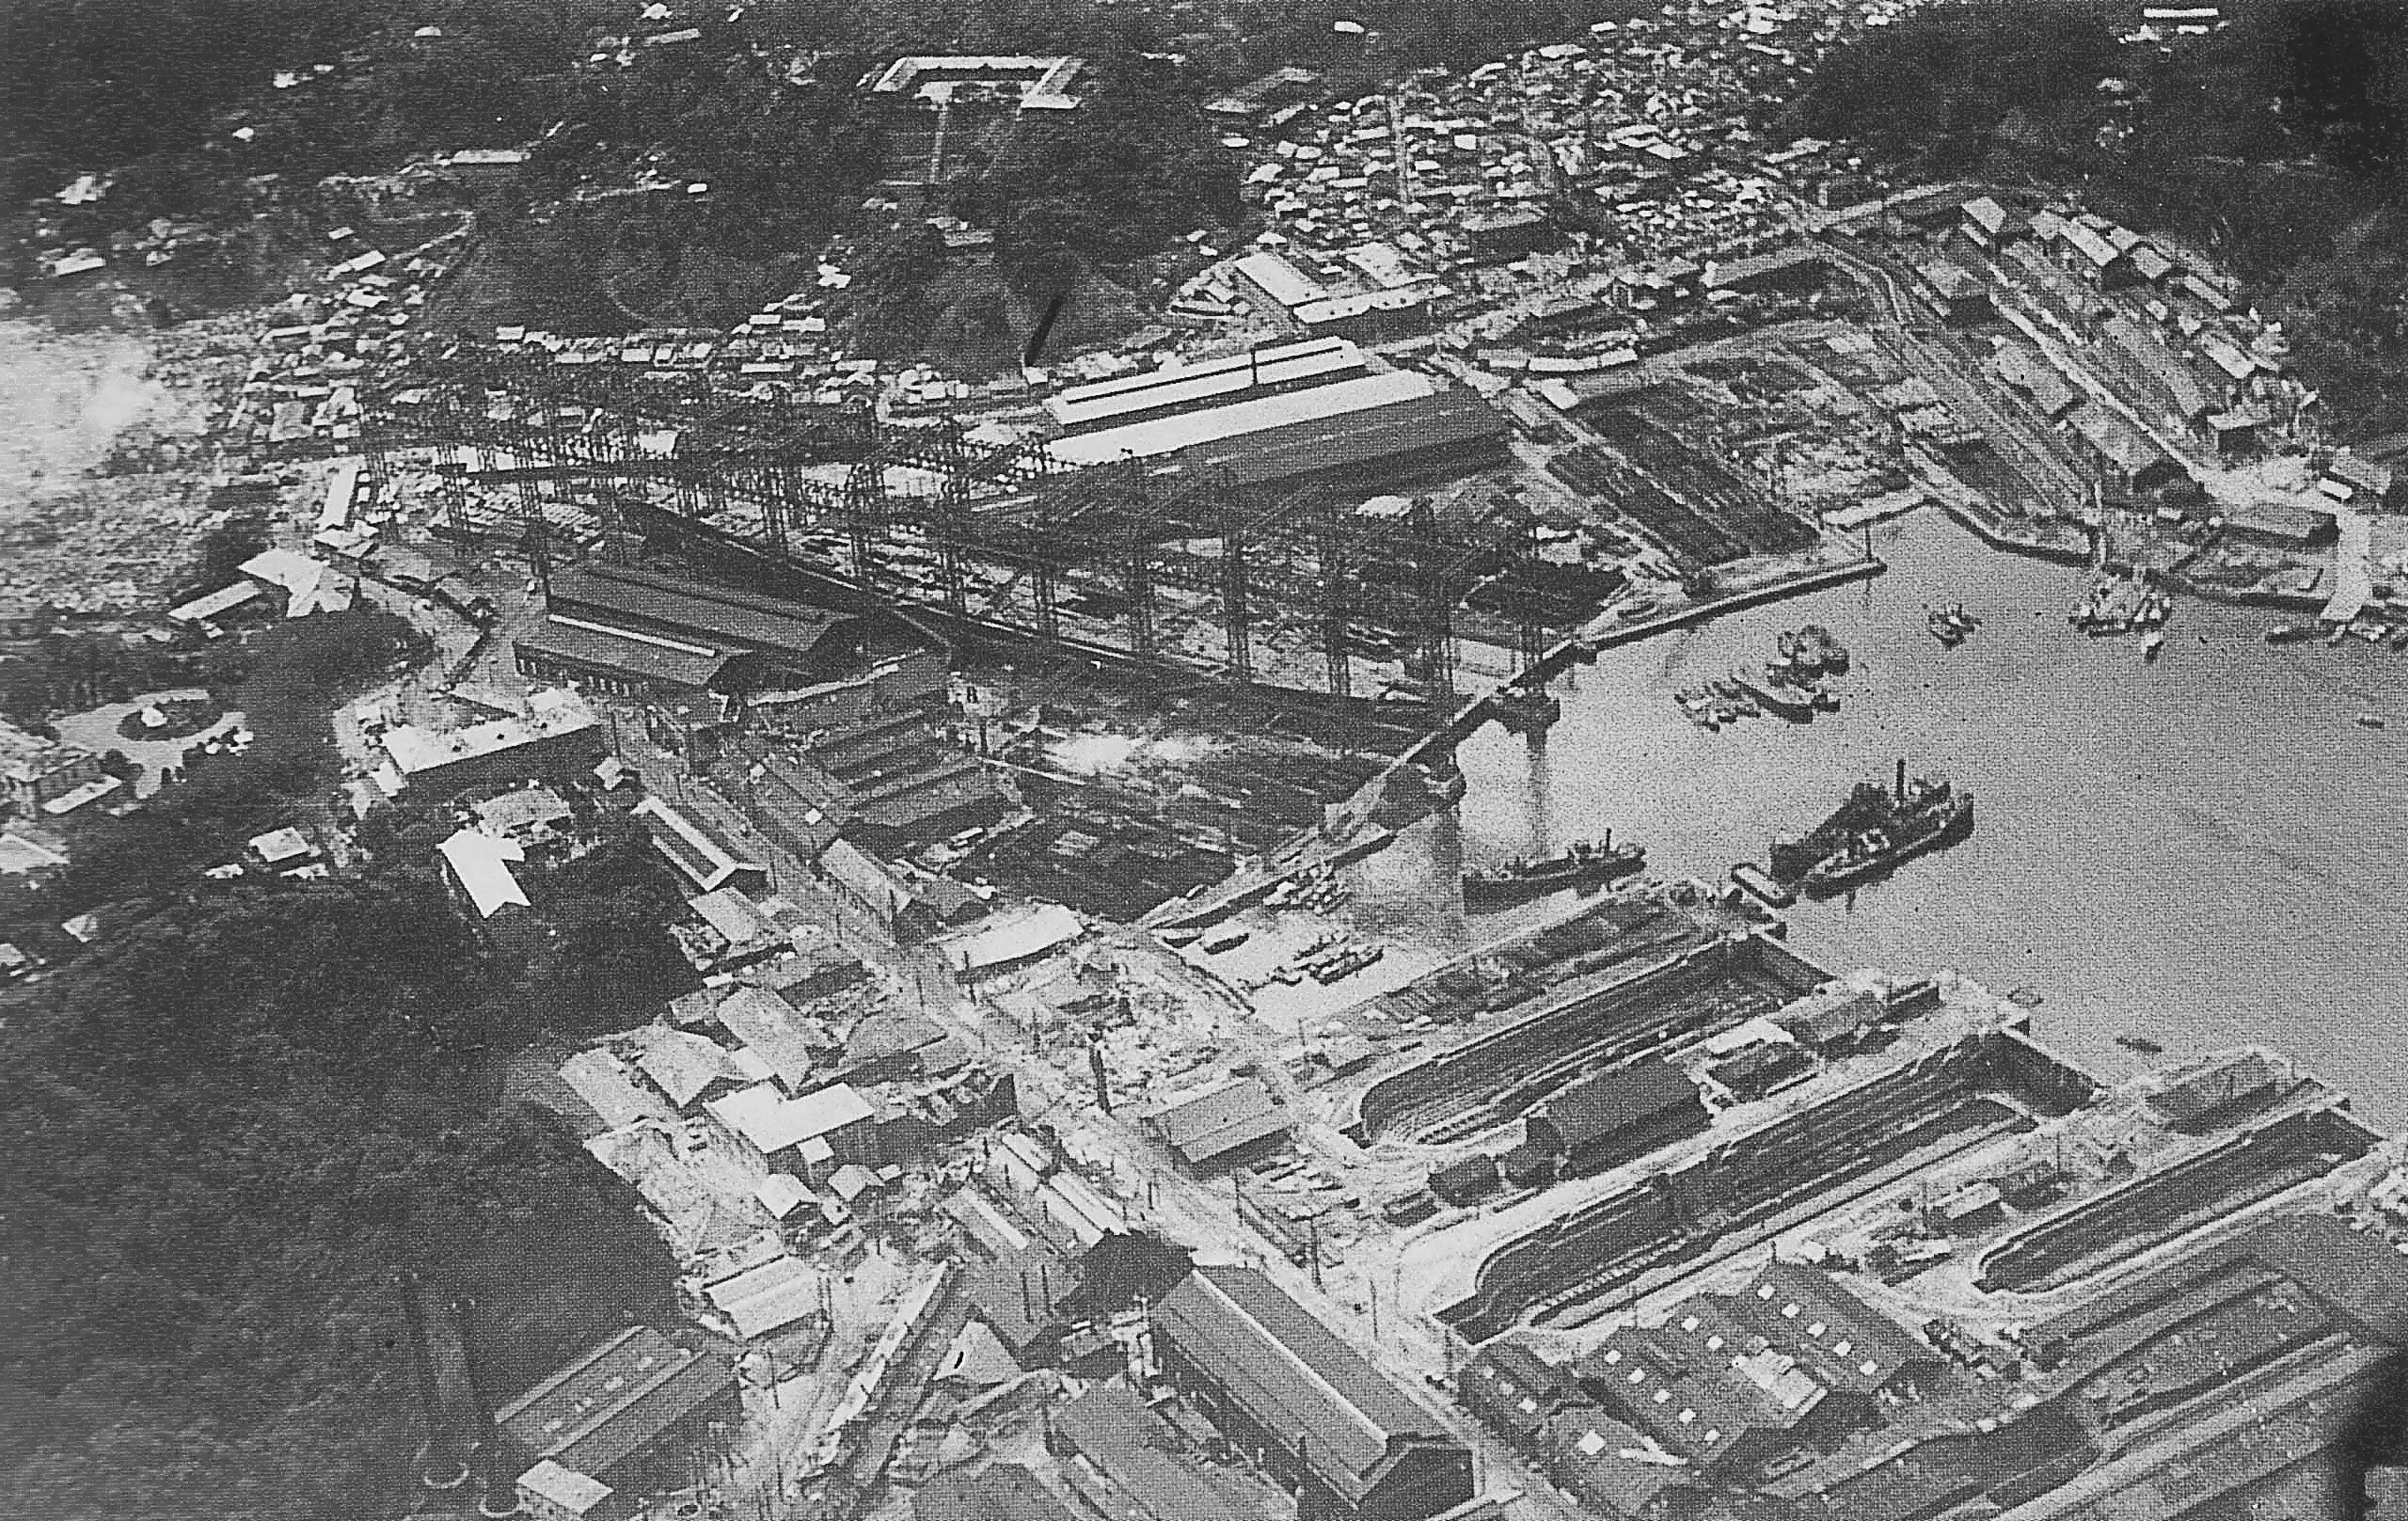 Aerial view of Yokosuka Naval Arsenal several days after the Great Kanto Earthquake of 1923, 3 or 4 Sep 1923; note battlecruiser Amagi in drydock